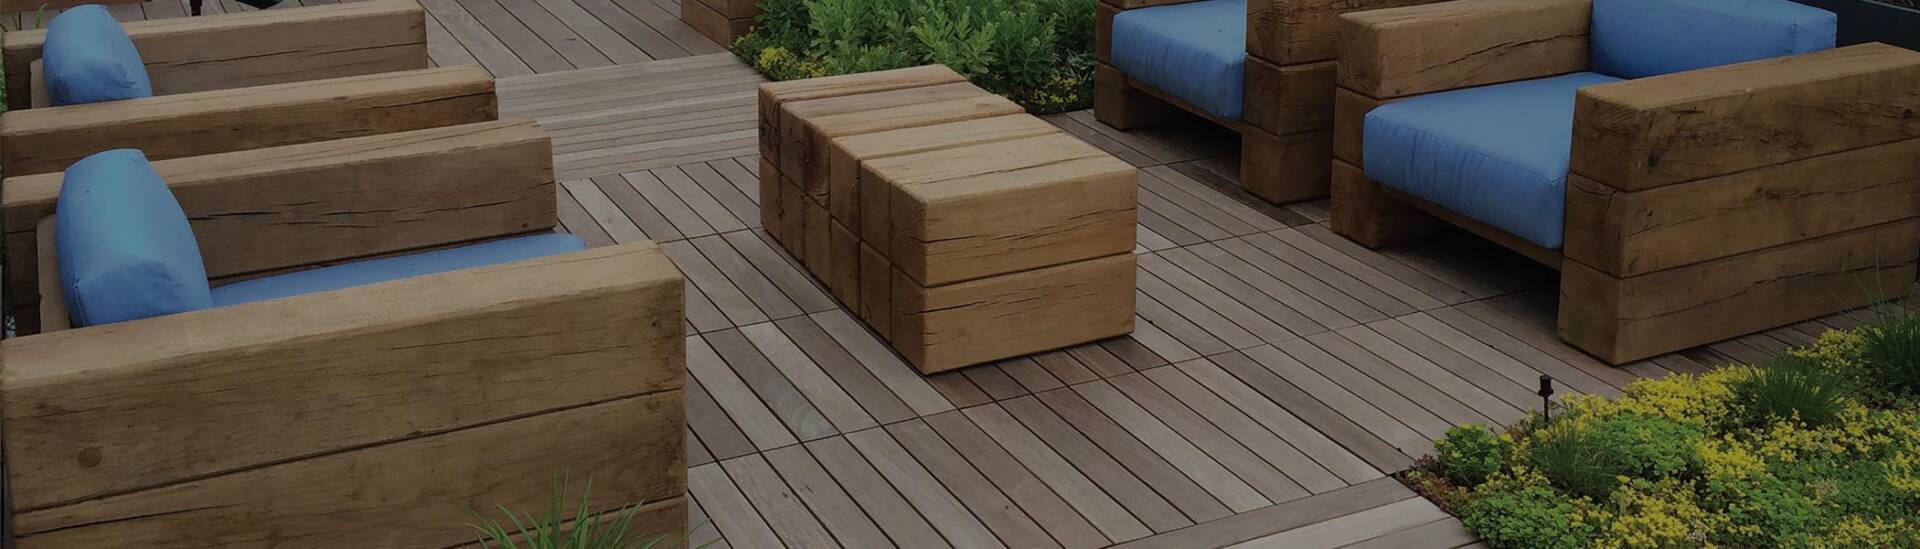 Wooden Outdoor Seating Area